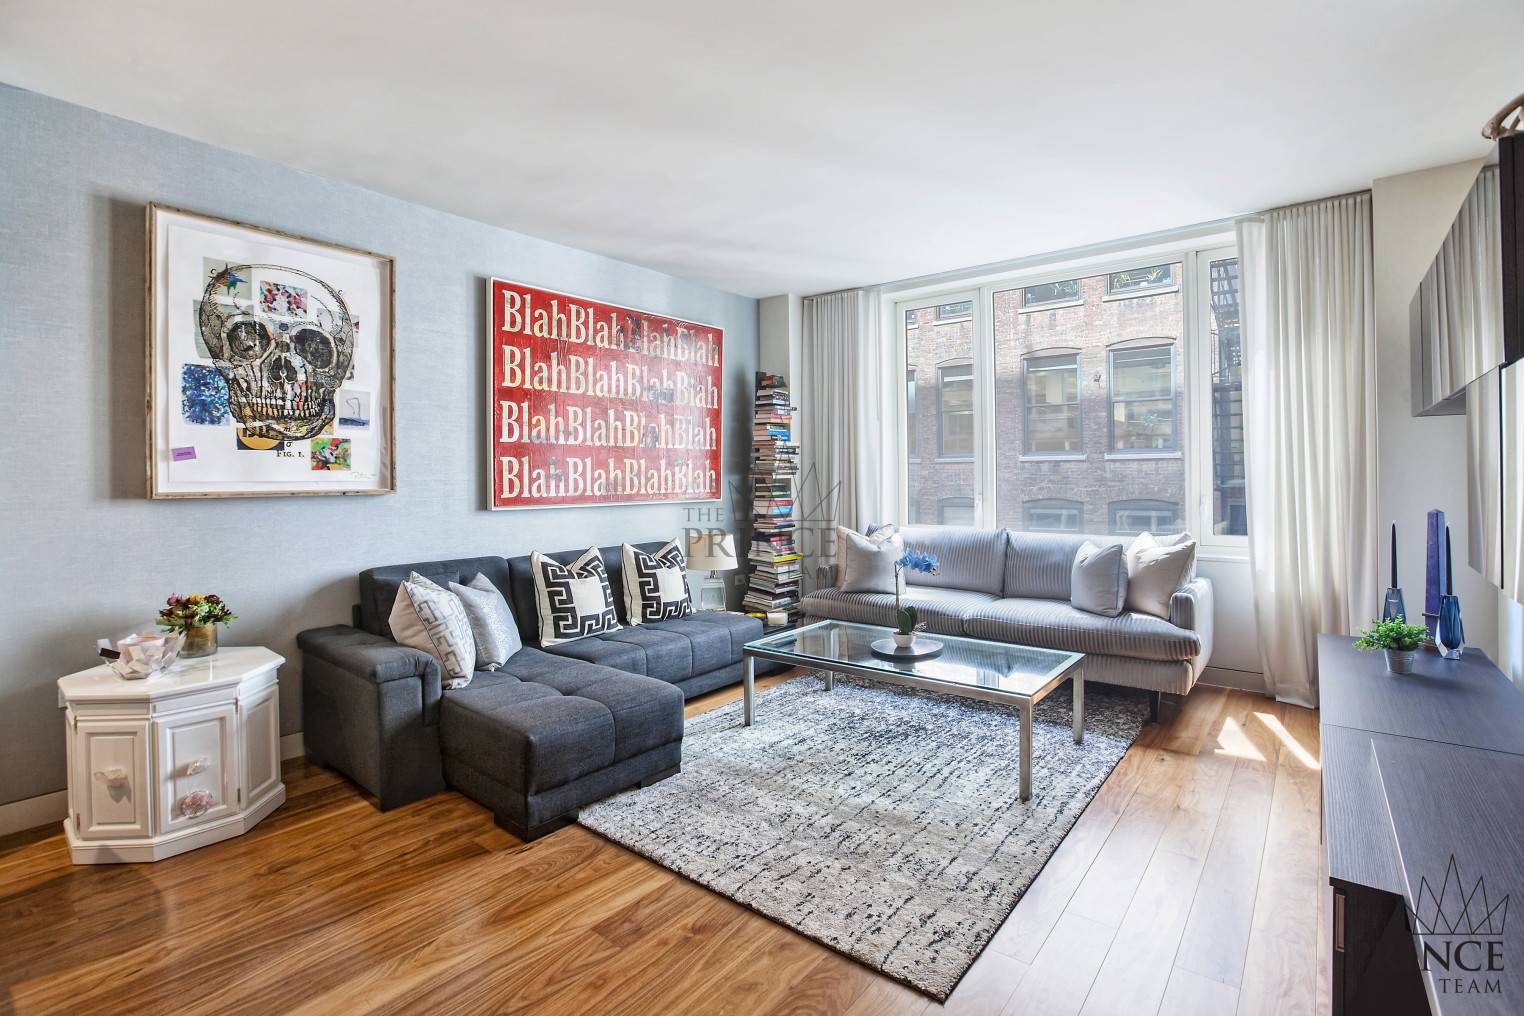 Combining stunning, eco friendly design and an ideal Chelsea location, this gorgeous one bedroom, one bathroom condominium is a true haven in the heart of the city.